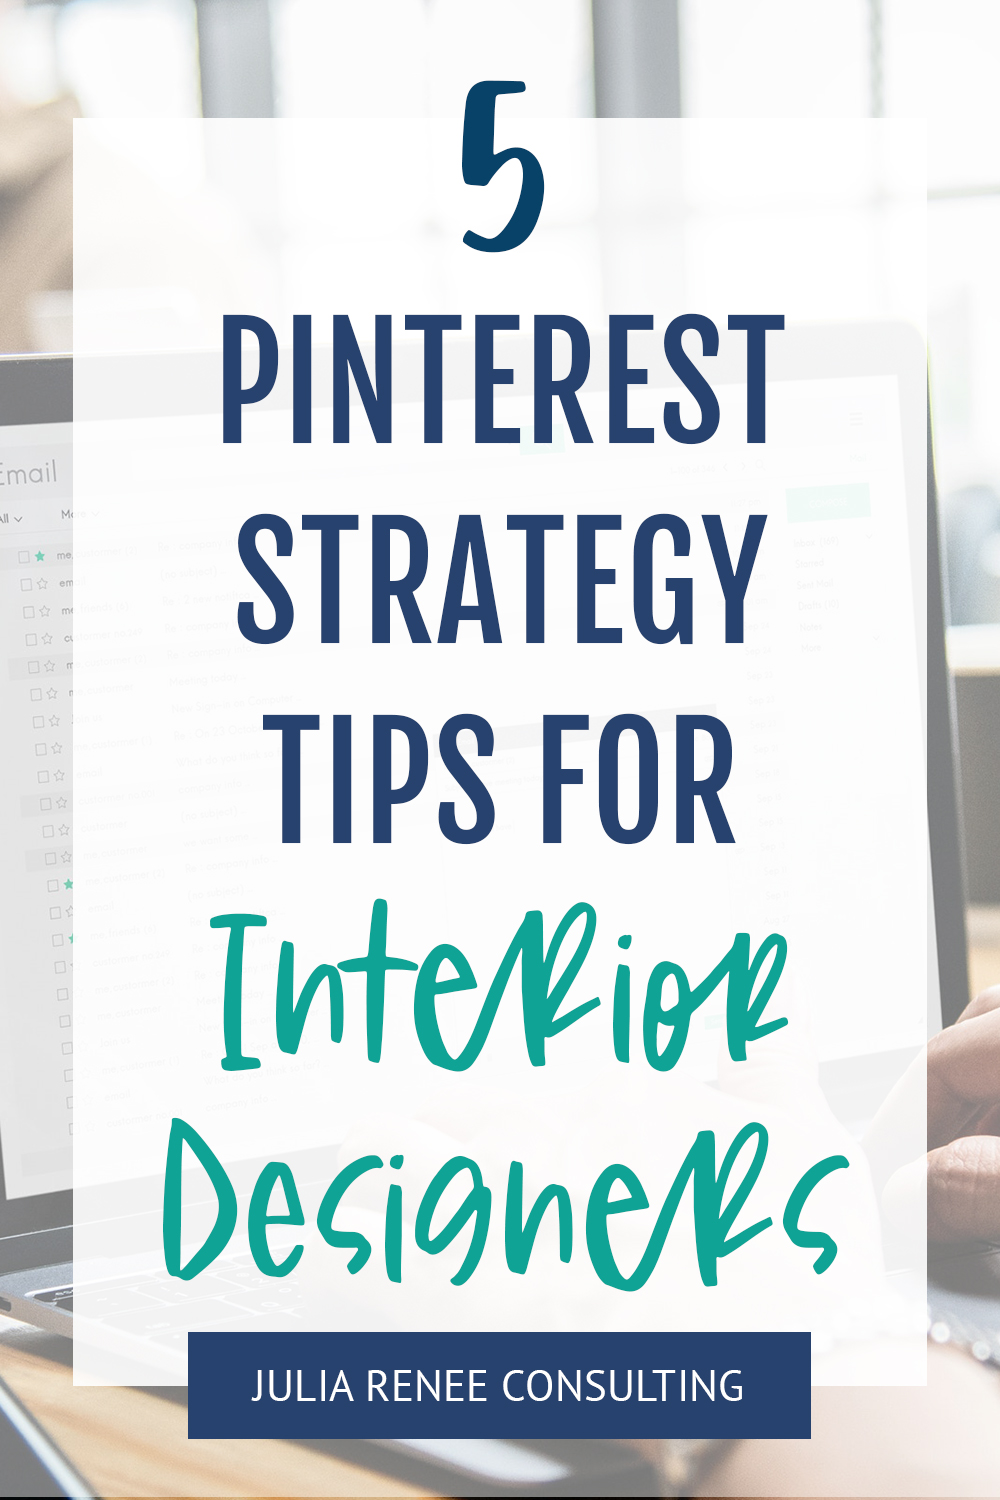 Top 5 Pinterest Marketing Strategy Tips for Interior Designers